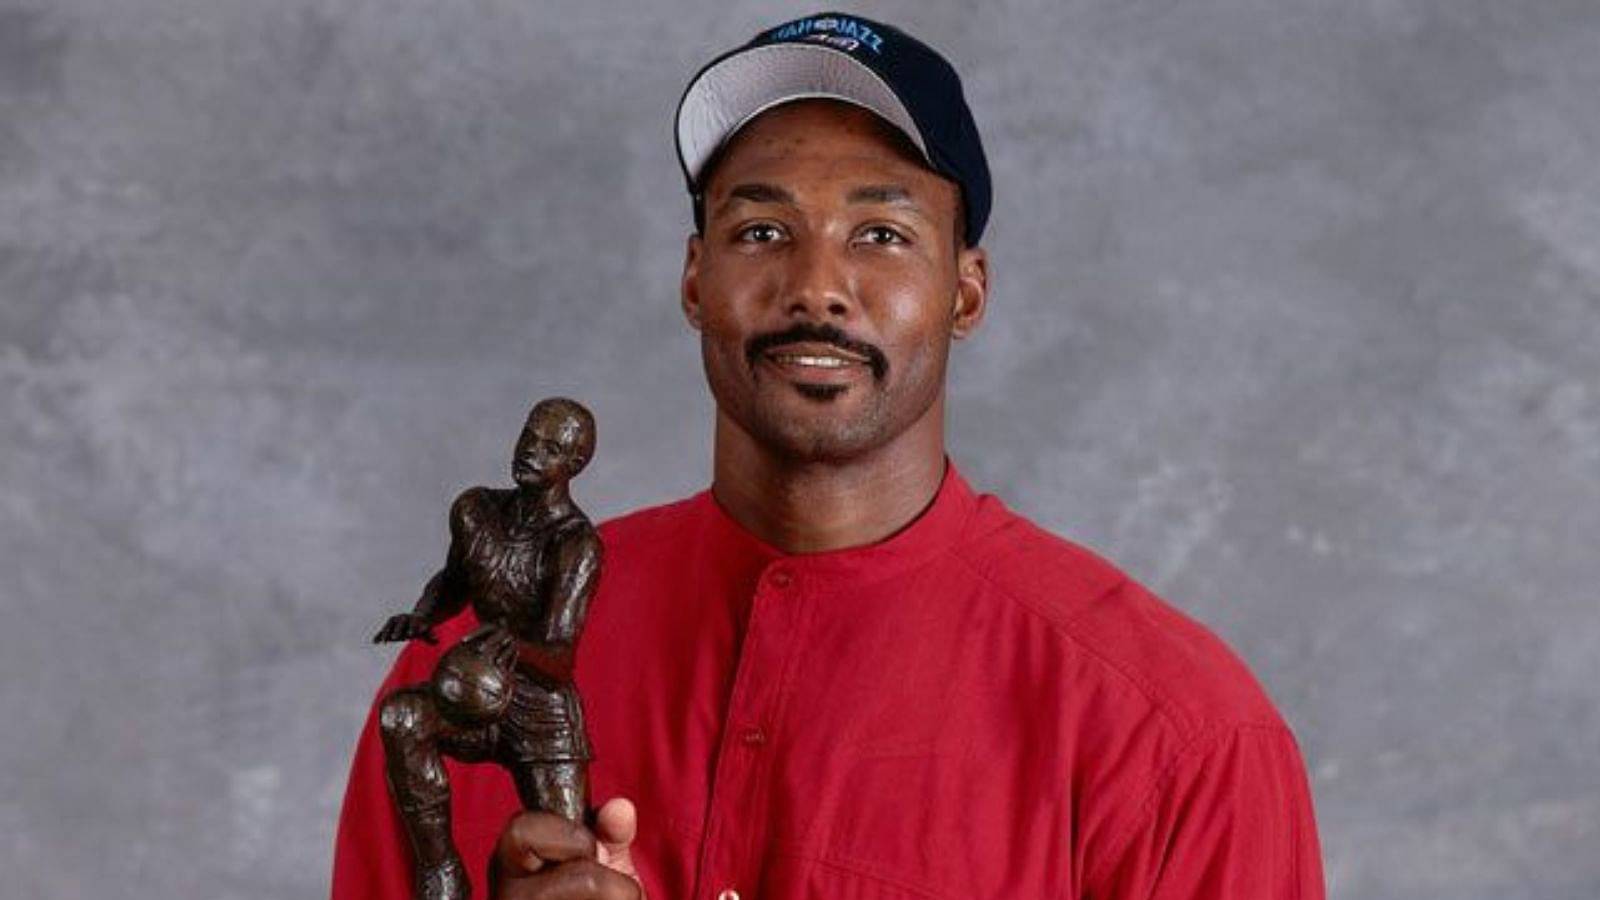 "Despite making $100 million, Karl Malone rejected paying $200 or $125 in child support": Jazz legend refused child support after impregnating a 13-year old